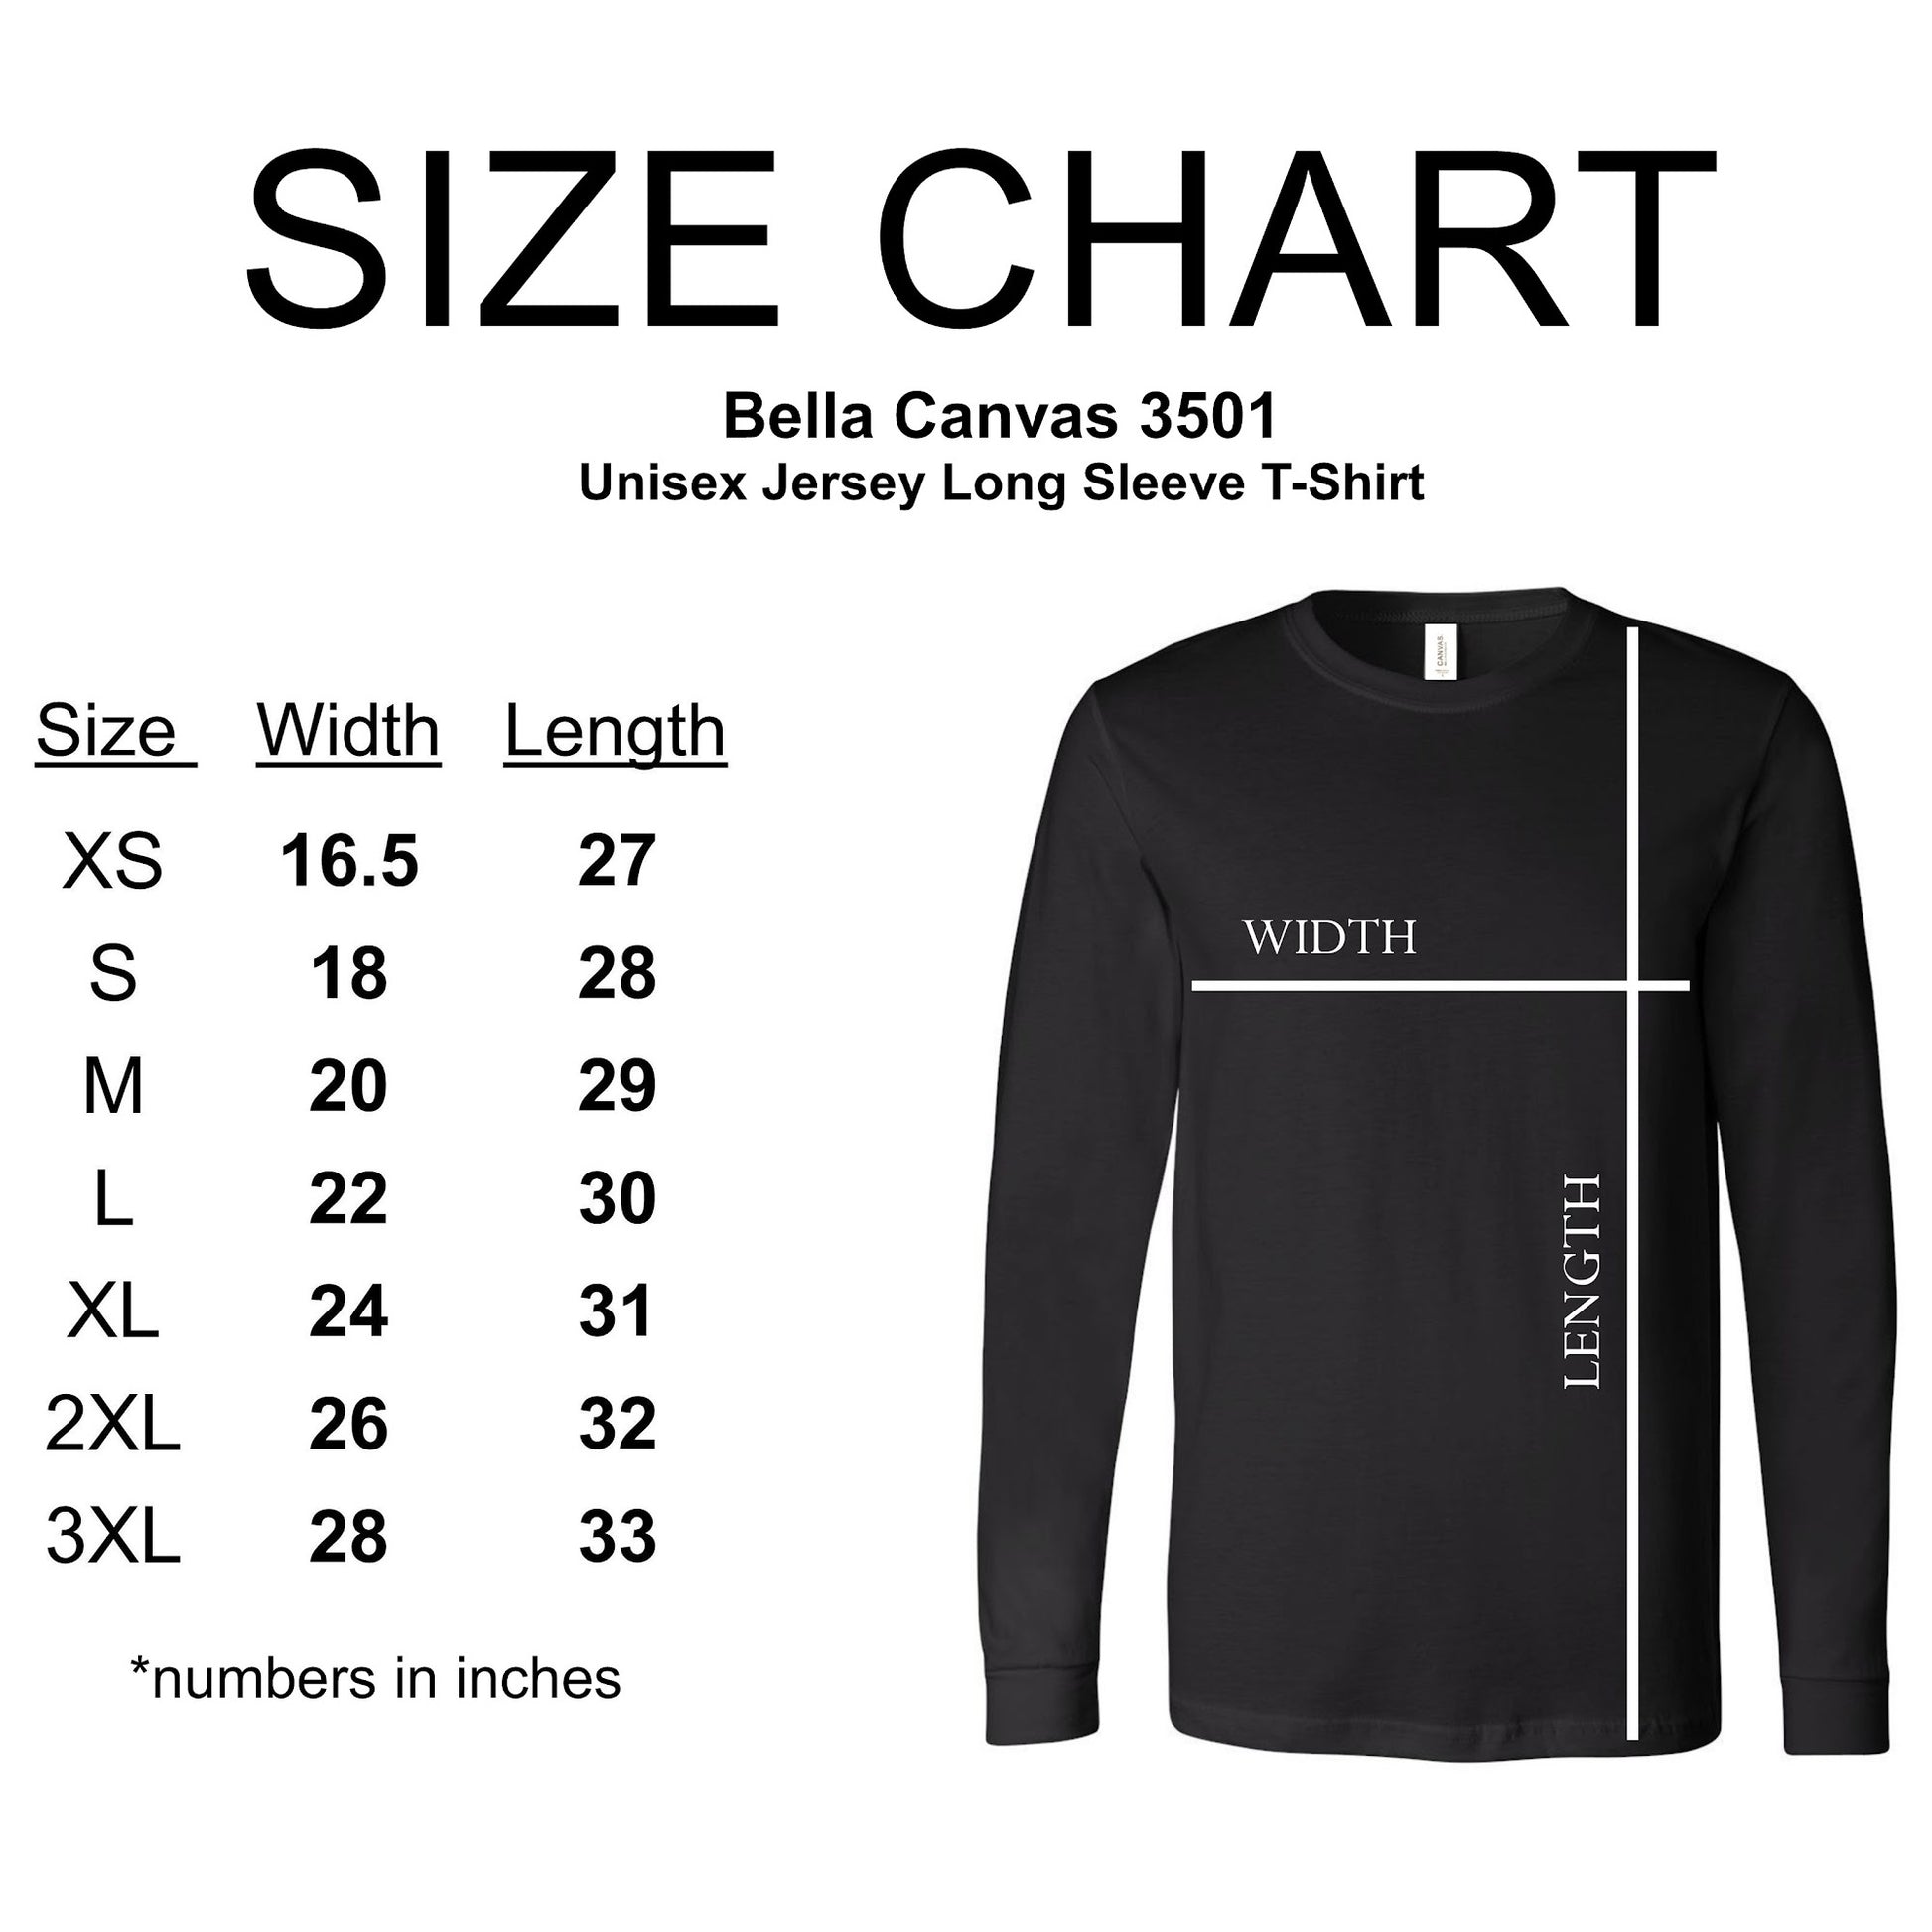 A size chart for this Bella + Canvas Long Sleeve t-shirt